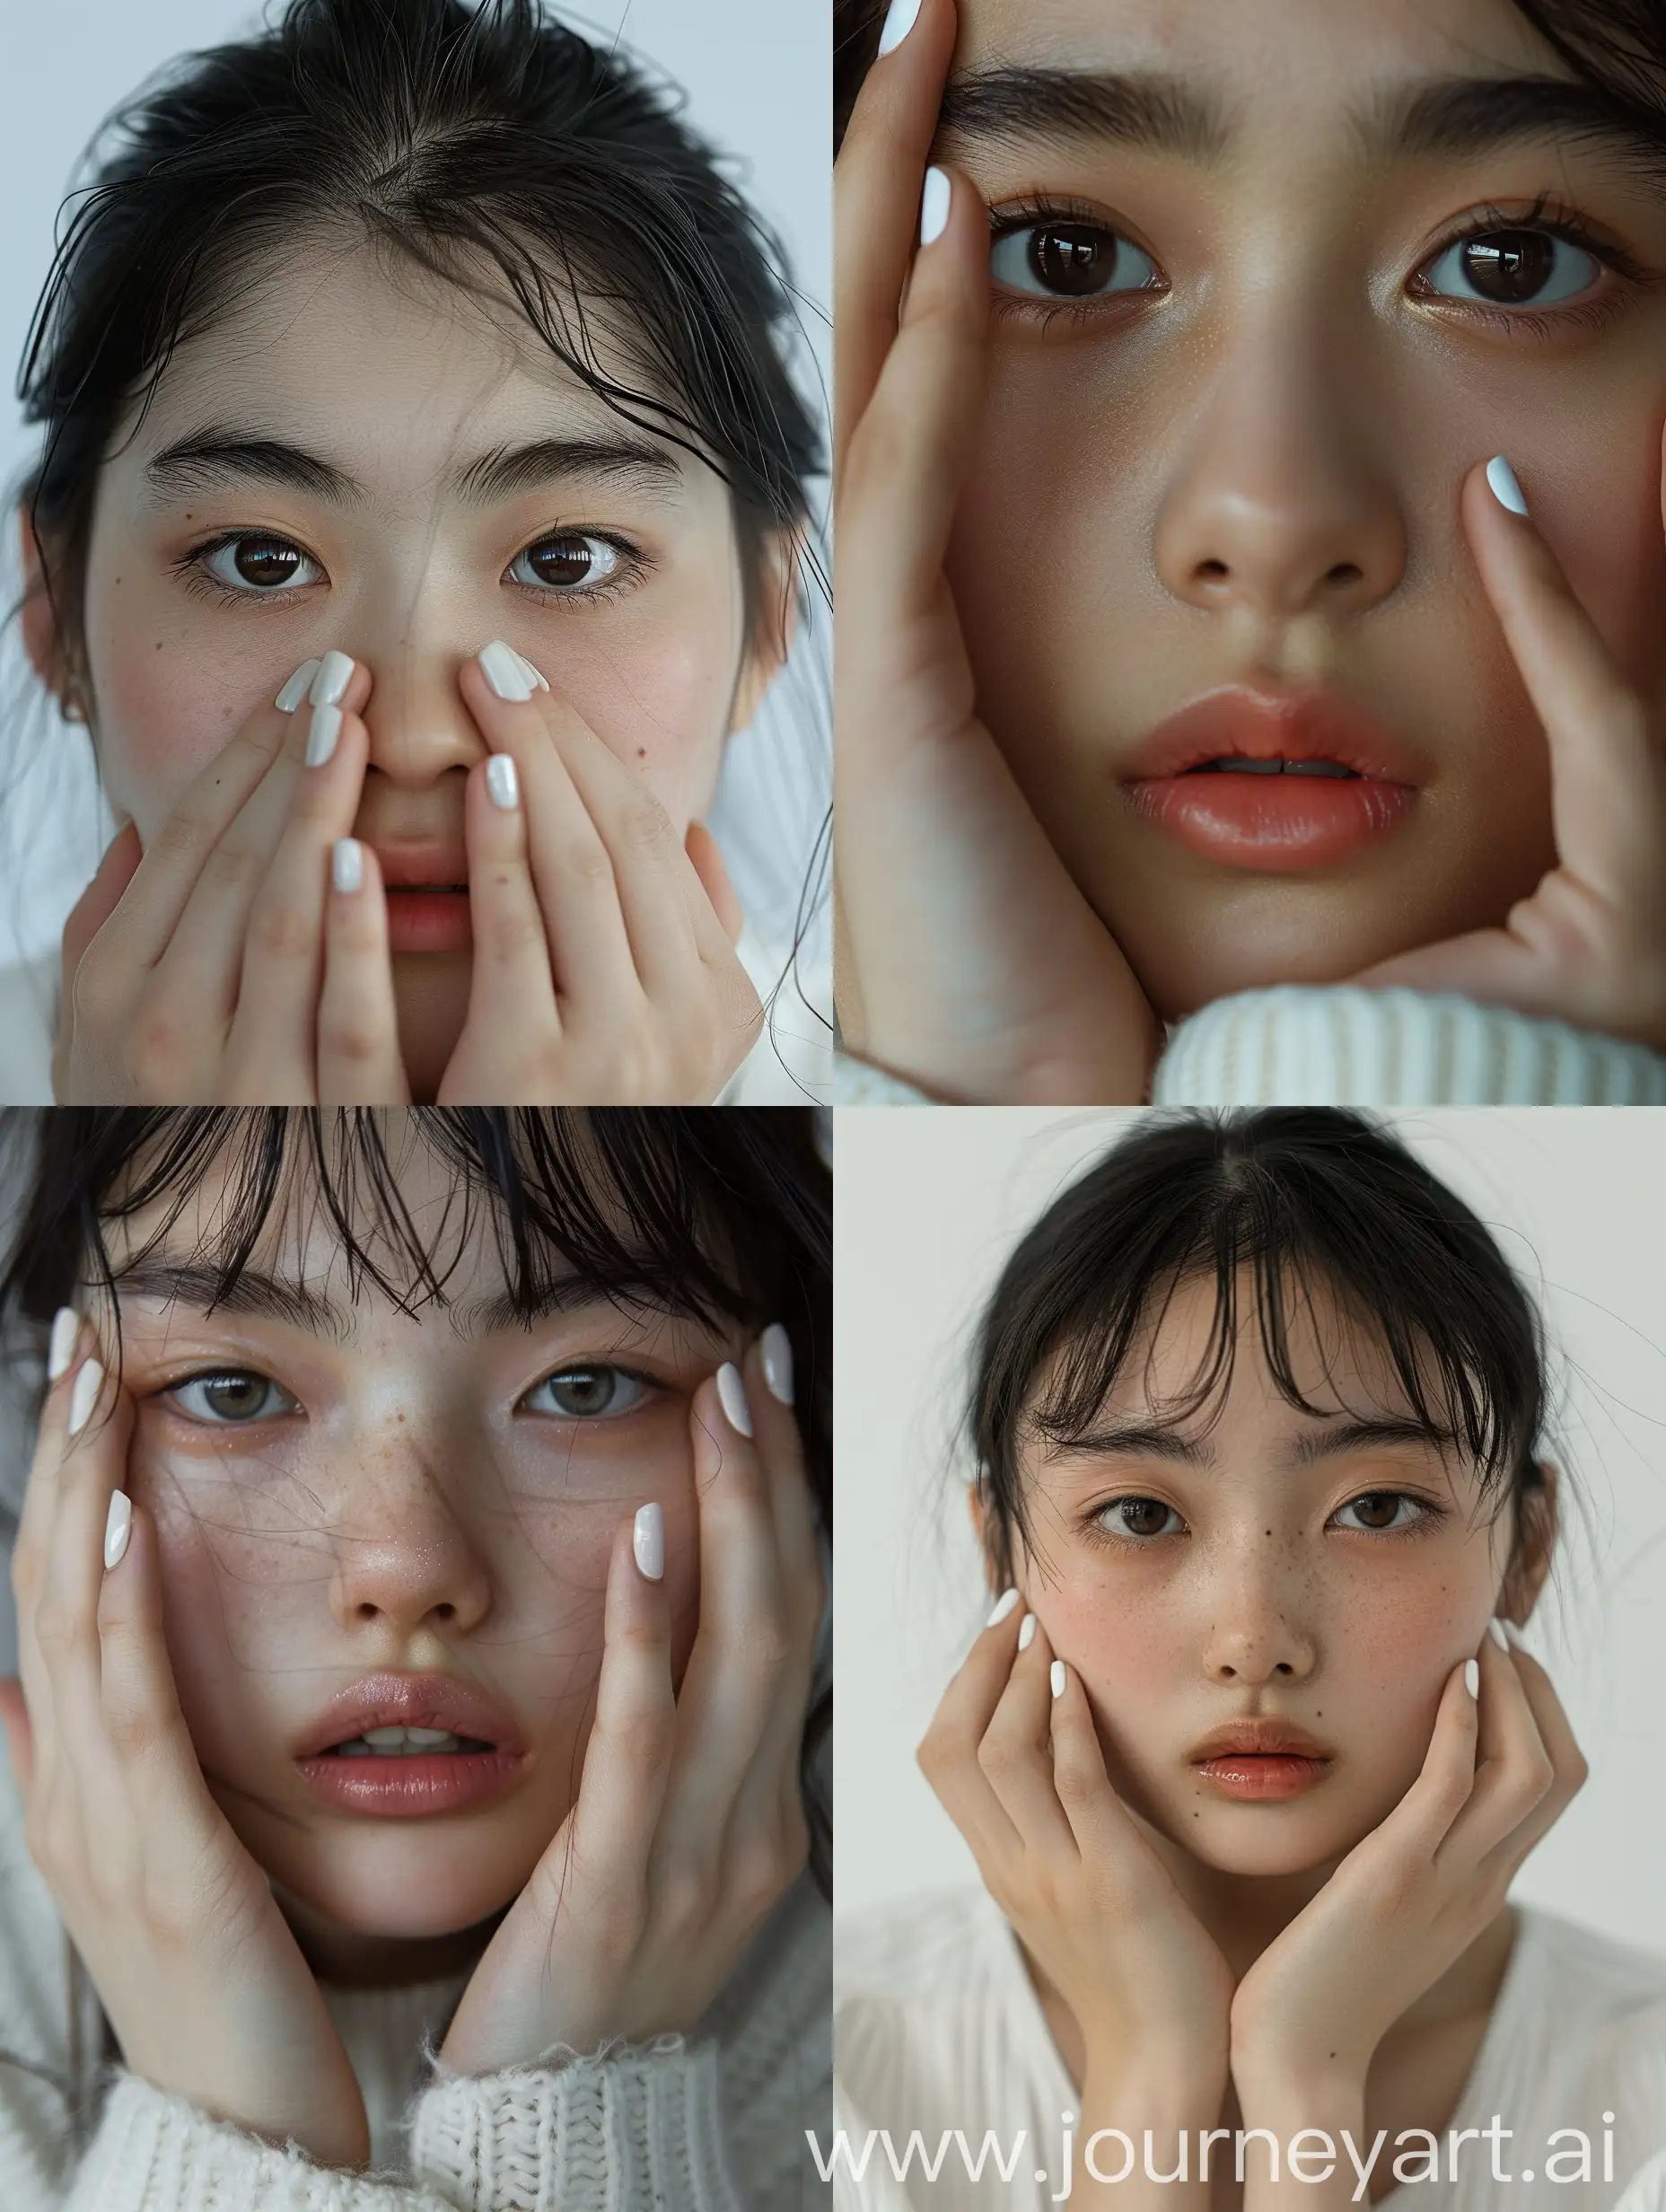 Photograph: Professional portrait of a Japanese 15 year old girl, bushy eyebrows, somber look, broad and big nose, top model, hands cover part of face, white gel nail polish